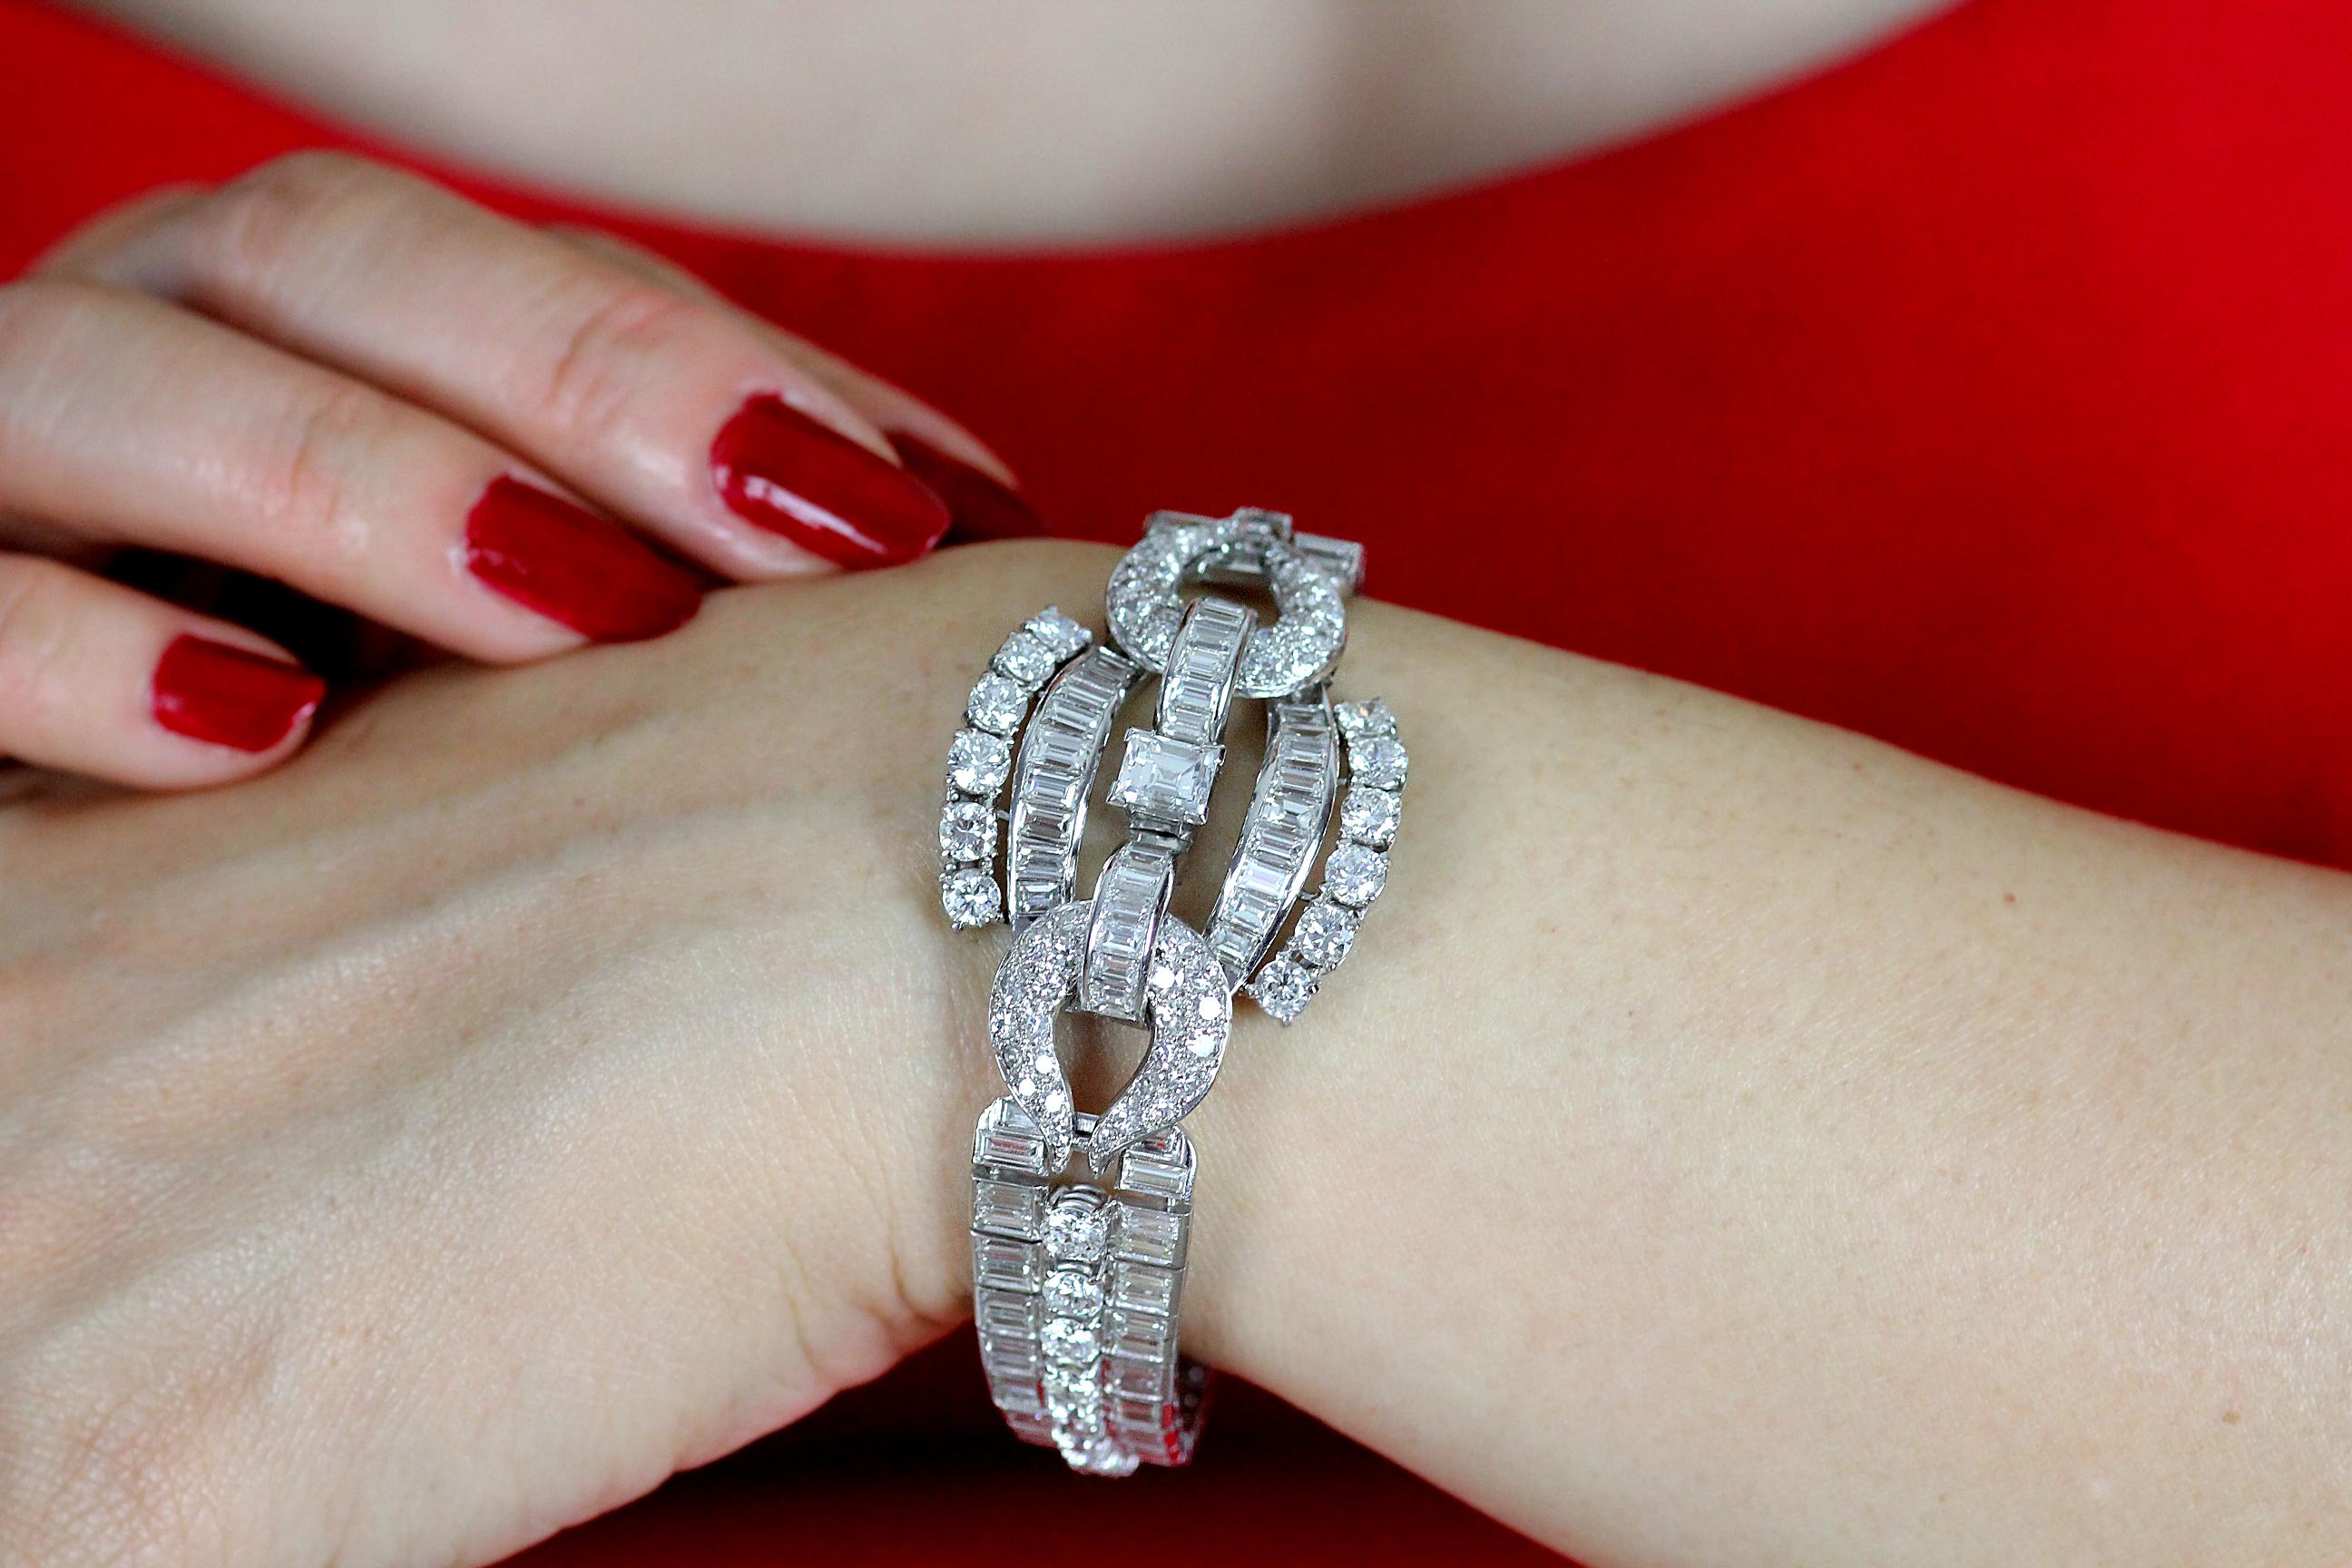 A splendid 1940s Art Deco style bracelet, handcrafted in platinum. It features a mixture of exceptionally high-quality brilliant and baguette-cut diamonds and complement and contrast. Light up the room in this stunning bracelet that will be sure to